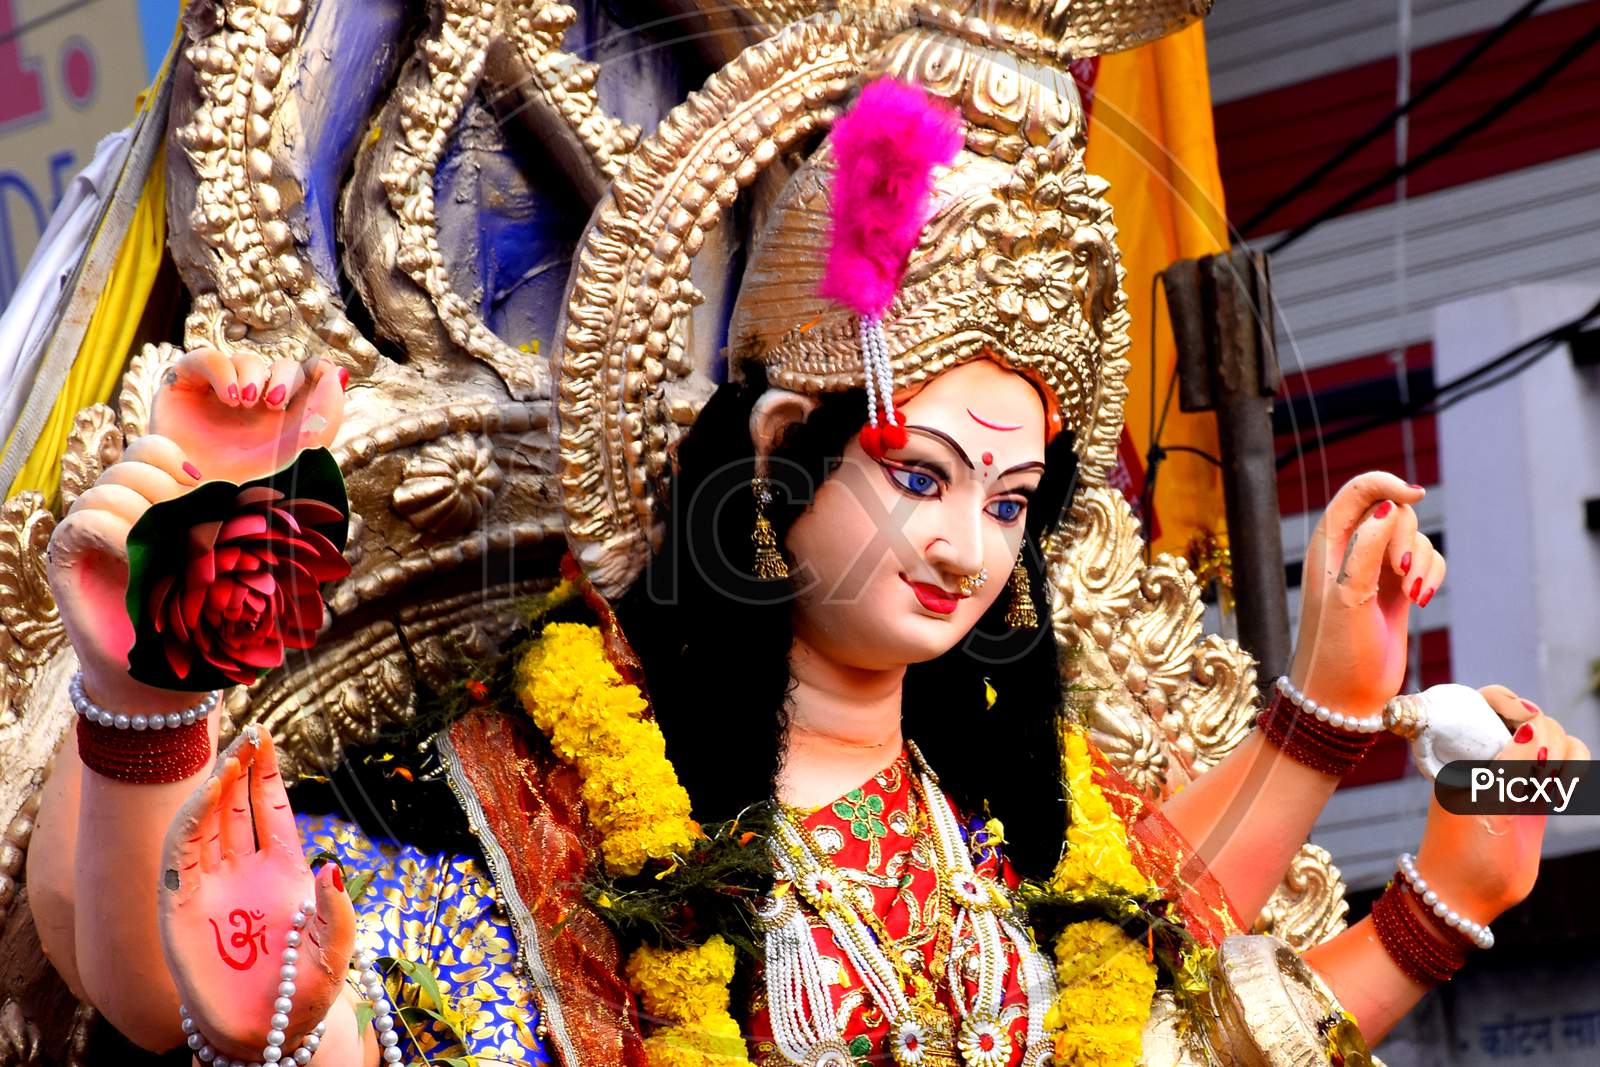 Sculpture Of Hindu Goddess Durga, Goddess Durga Idol With Ornaments In Close Up Side Face View